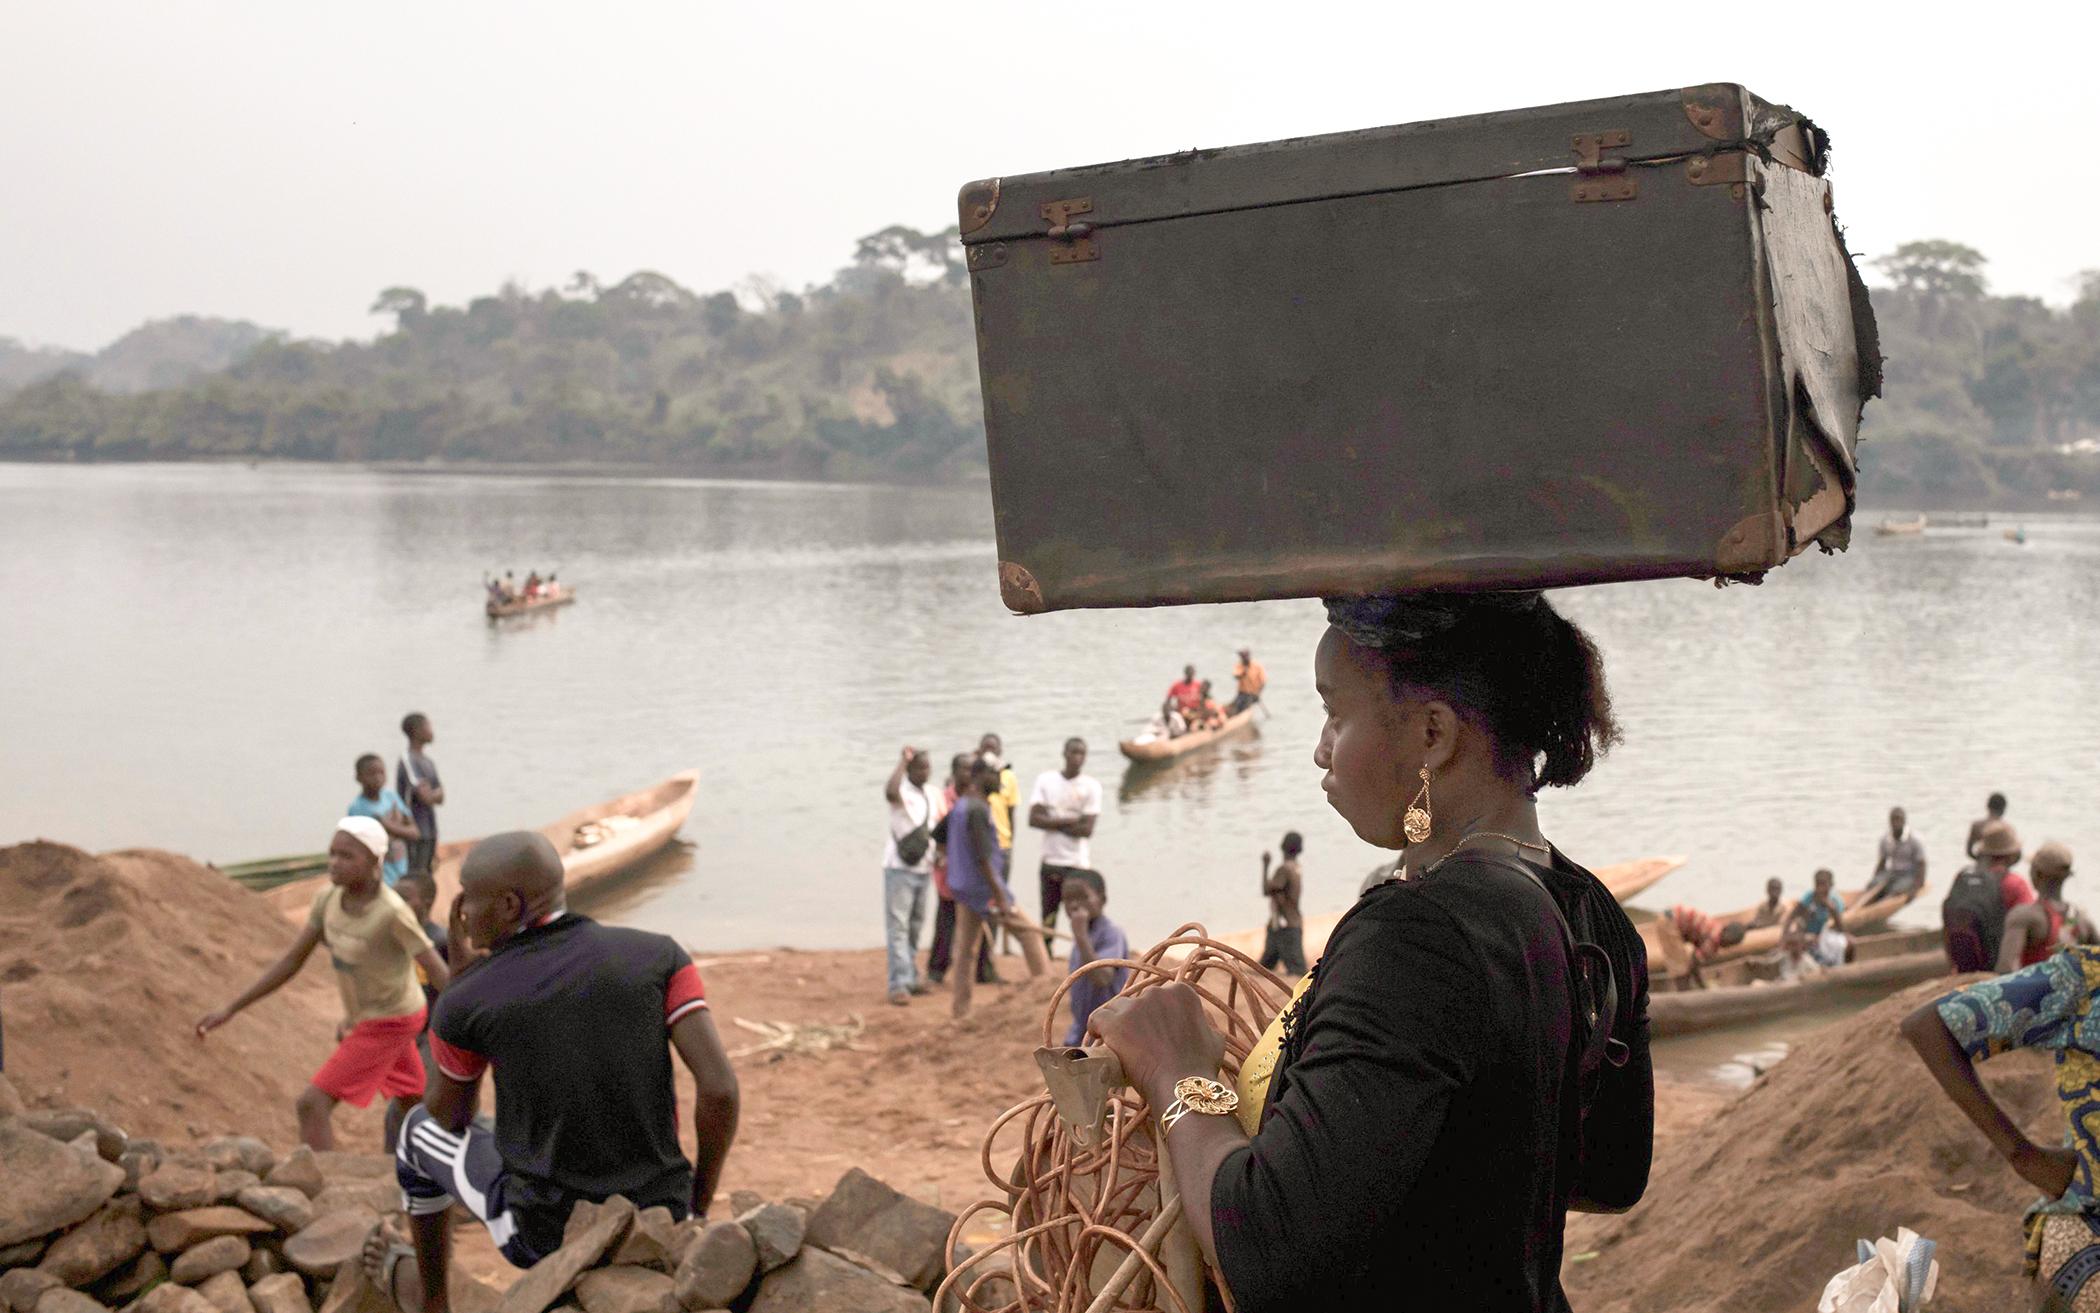 A woman carries her belongings back into Bangassou, Central African Republic, from Ndu in the Democratic Republic of the Congo, where she had taken refuge, Feb. 14, 2021. An estimated 240,000 people have been displaced in the country since mid-December, according to U.N. relief workers.